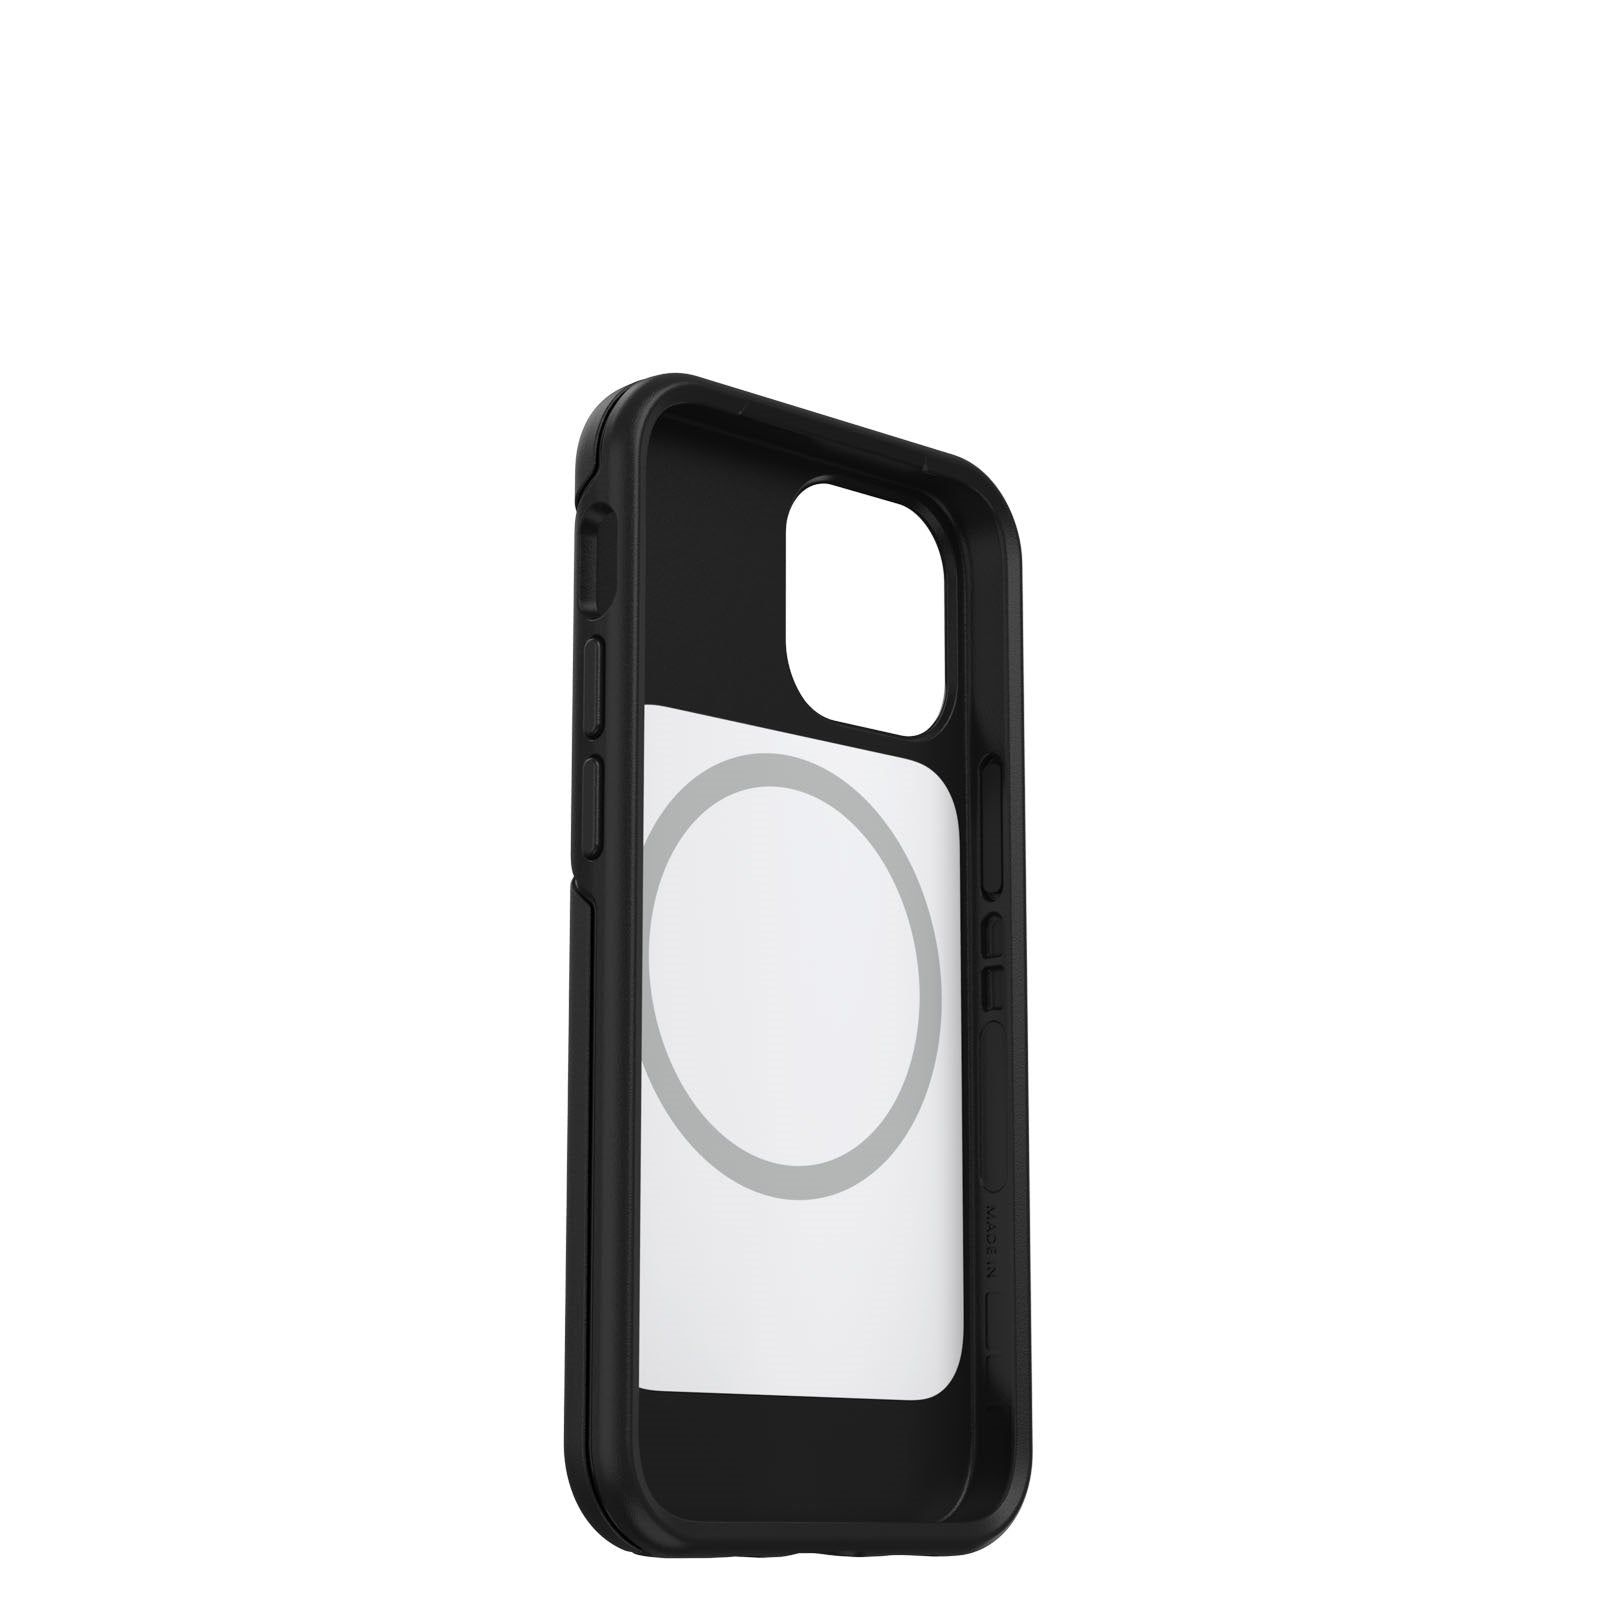 OTTERBOX Apple iPhone 13 mini Symmetry Series+ Antimicrobial Case with MagSafe (77-83594) - Black - Convenient open access to ports and speakers